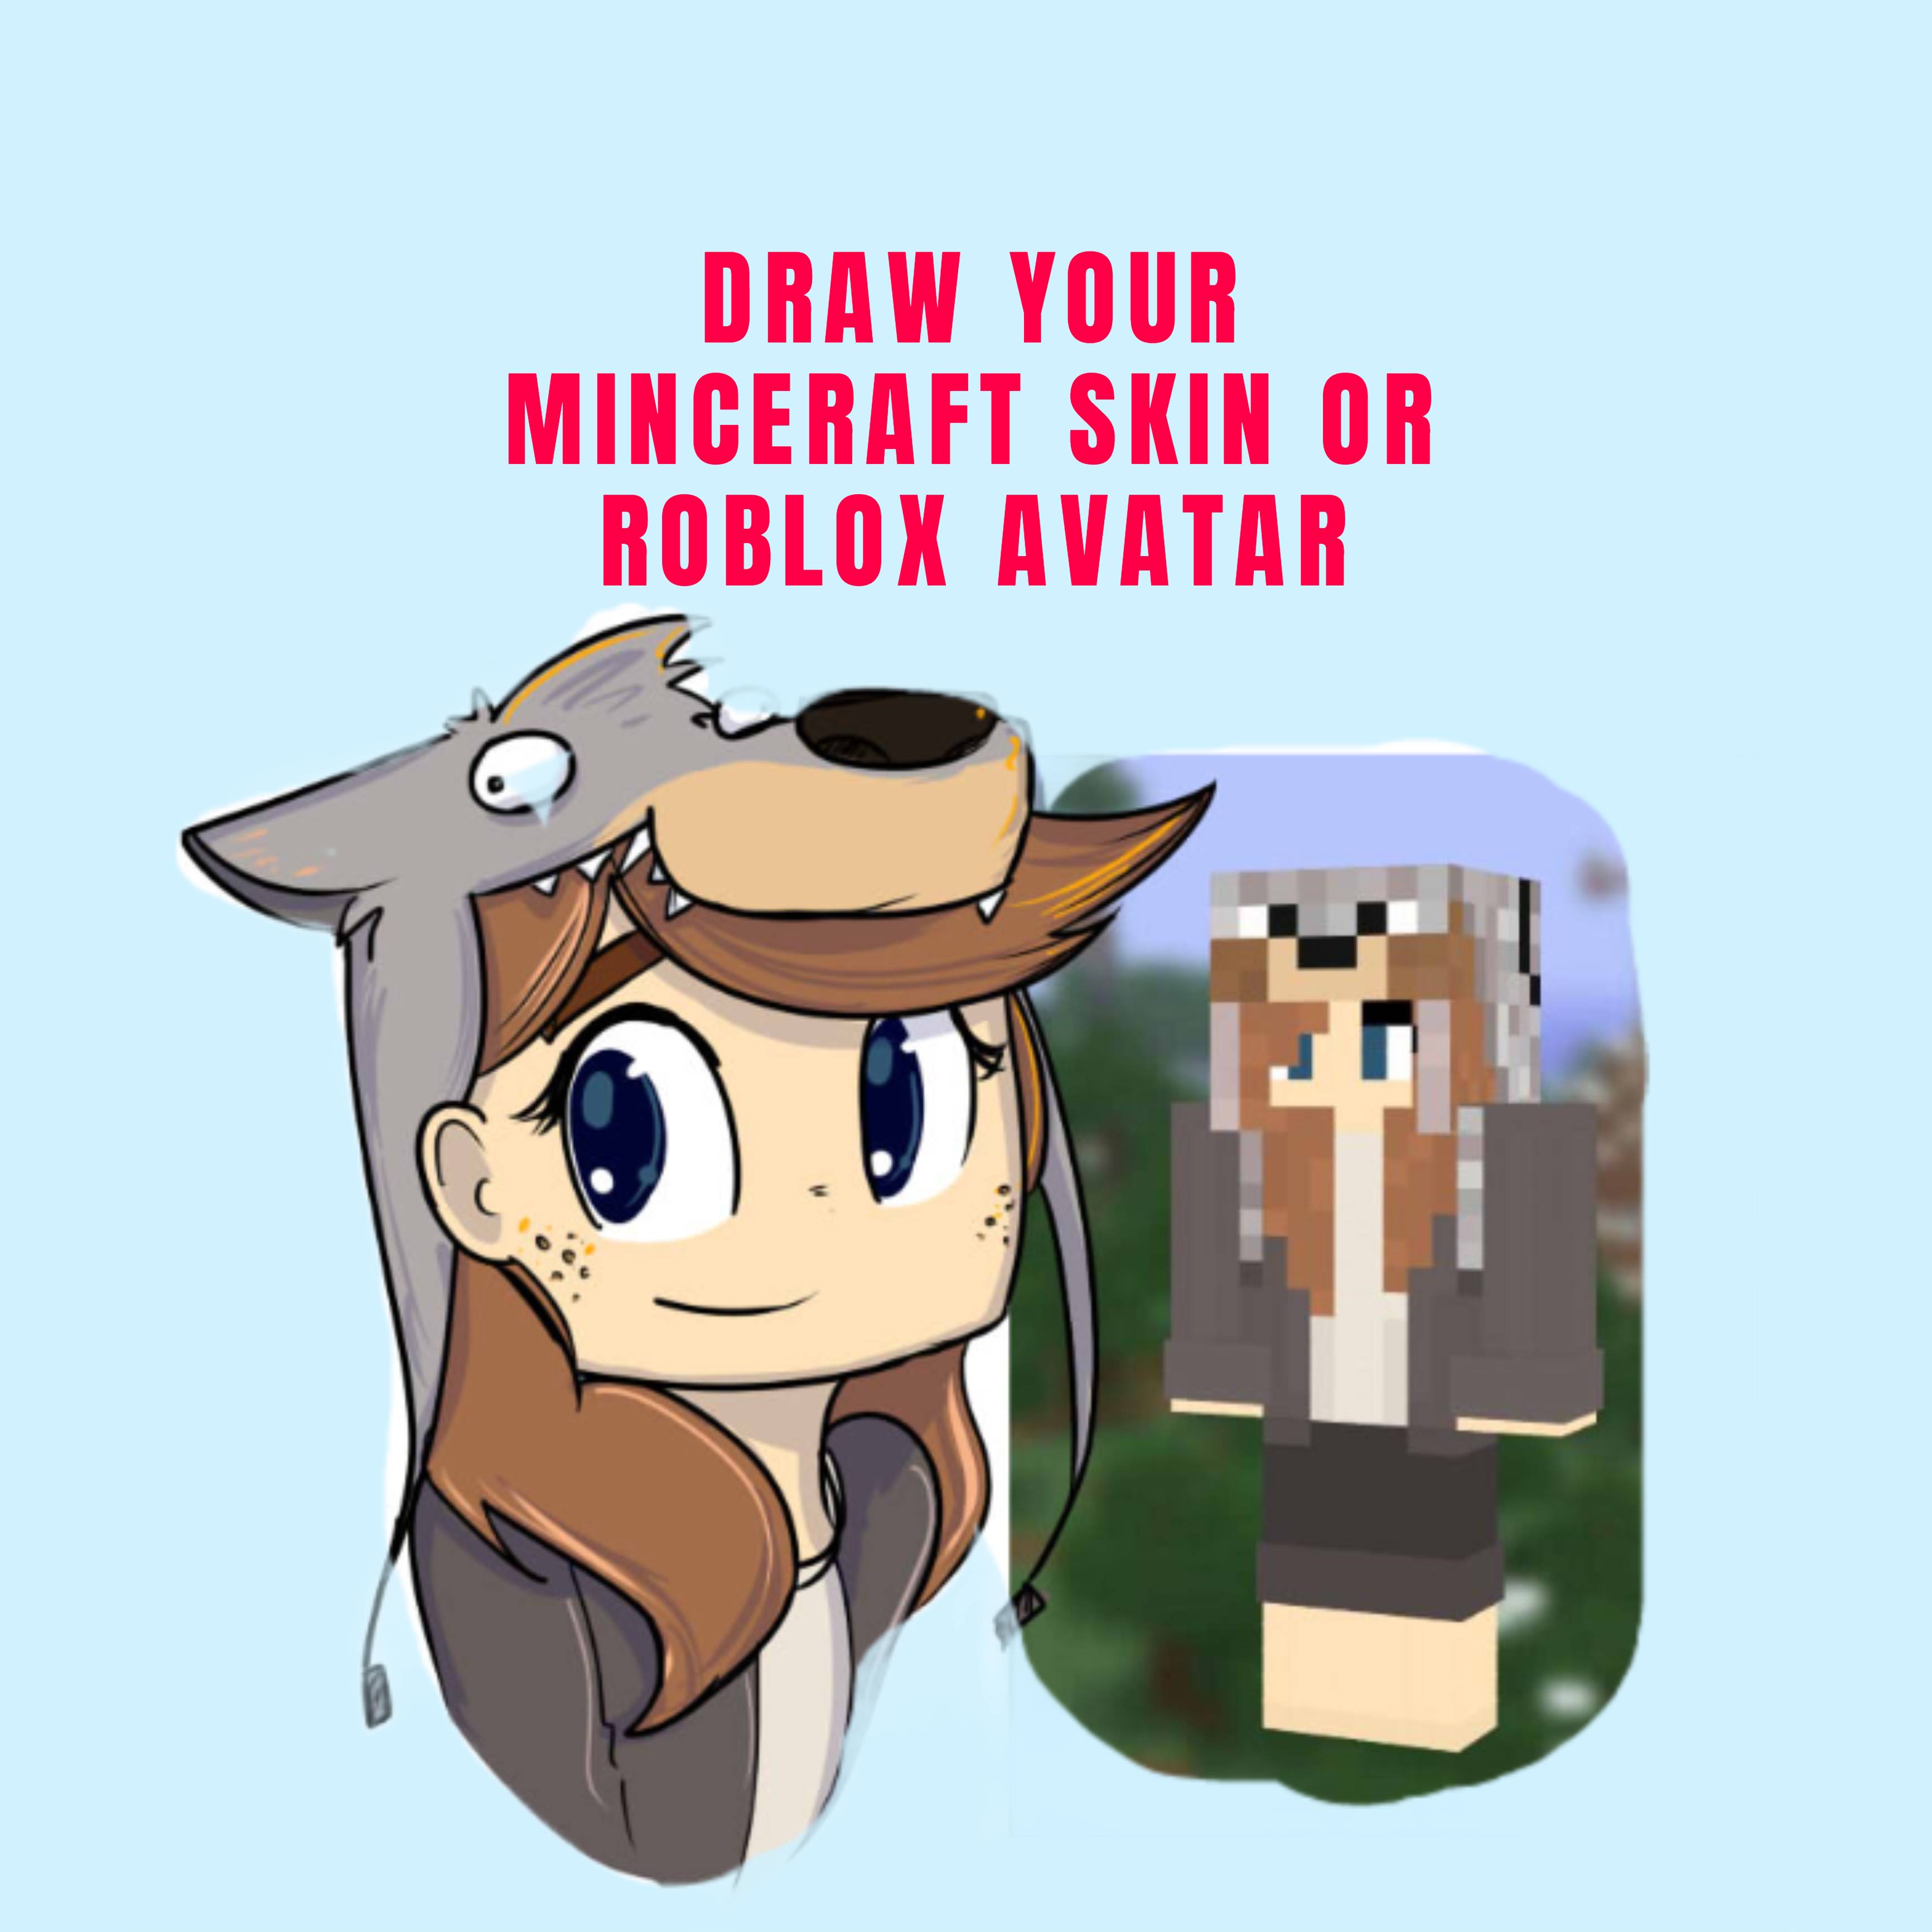 Draw Your Minecraft Skin Or Roblox Avatar By Asmae Daoud - roblox shading drawing minecraft t shirt shading black free